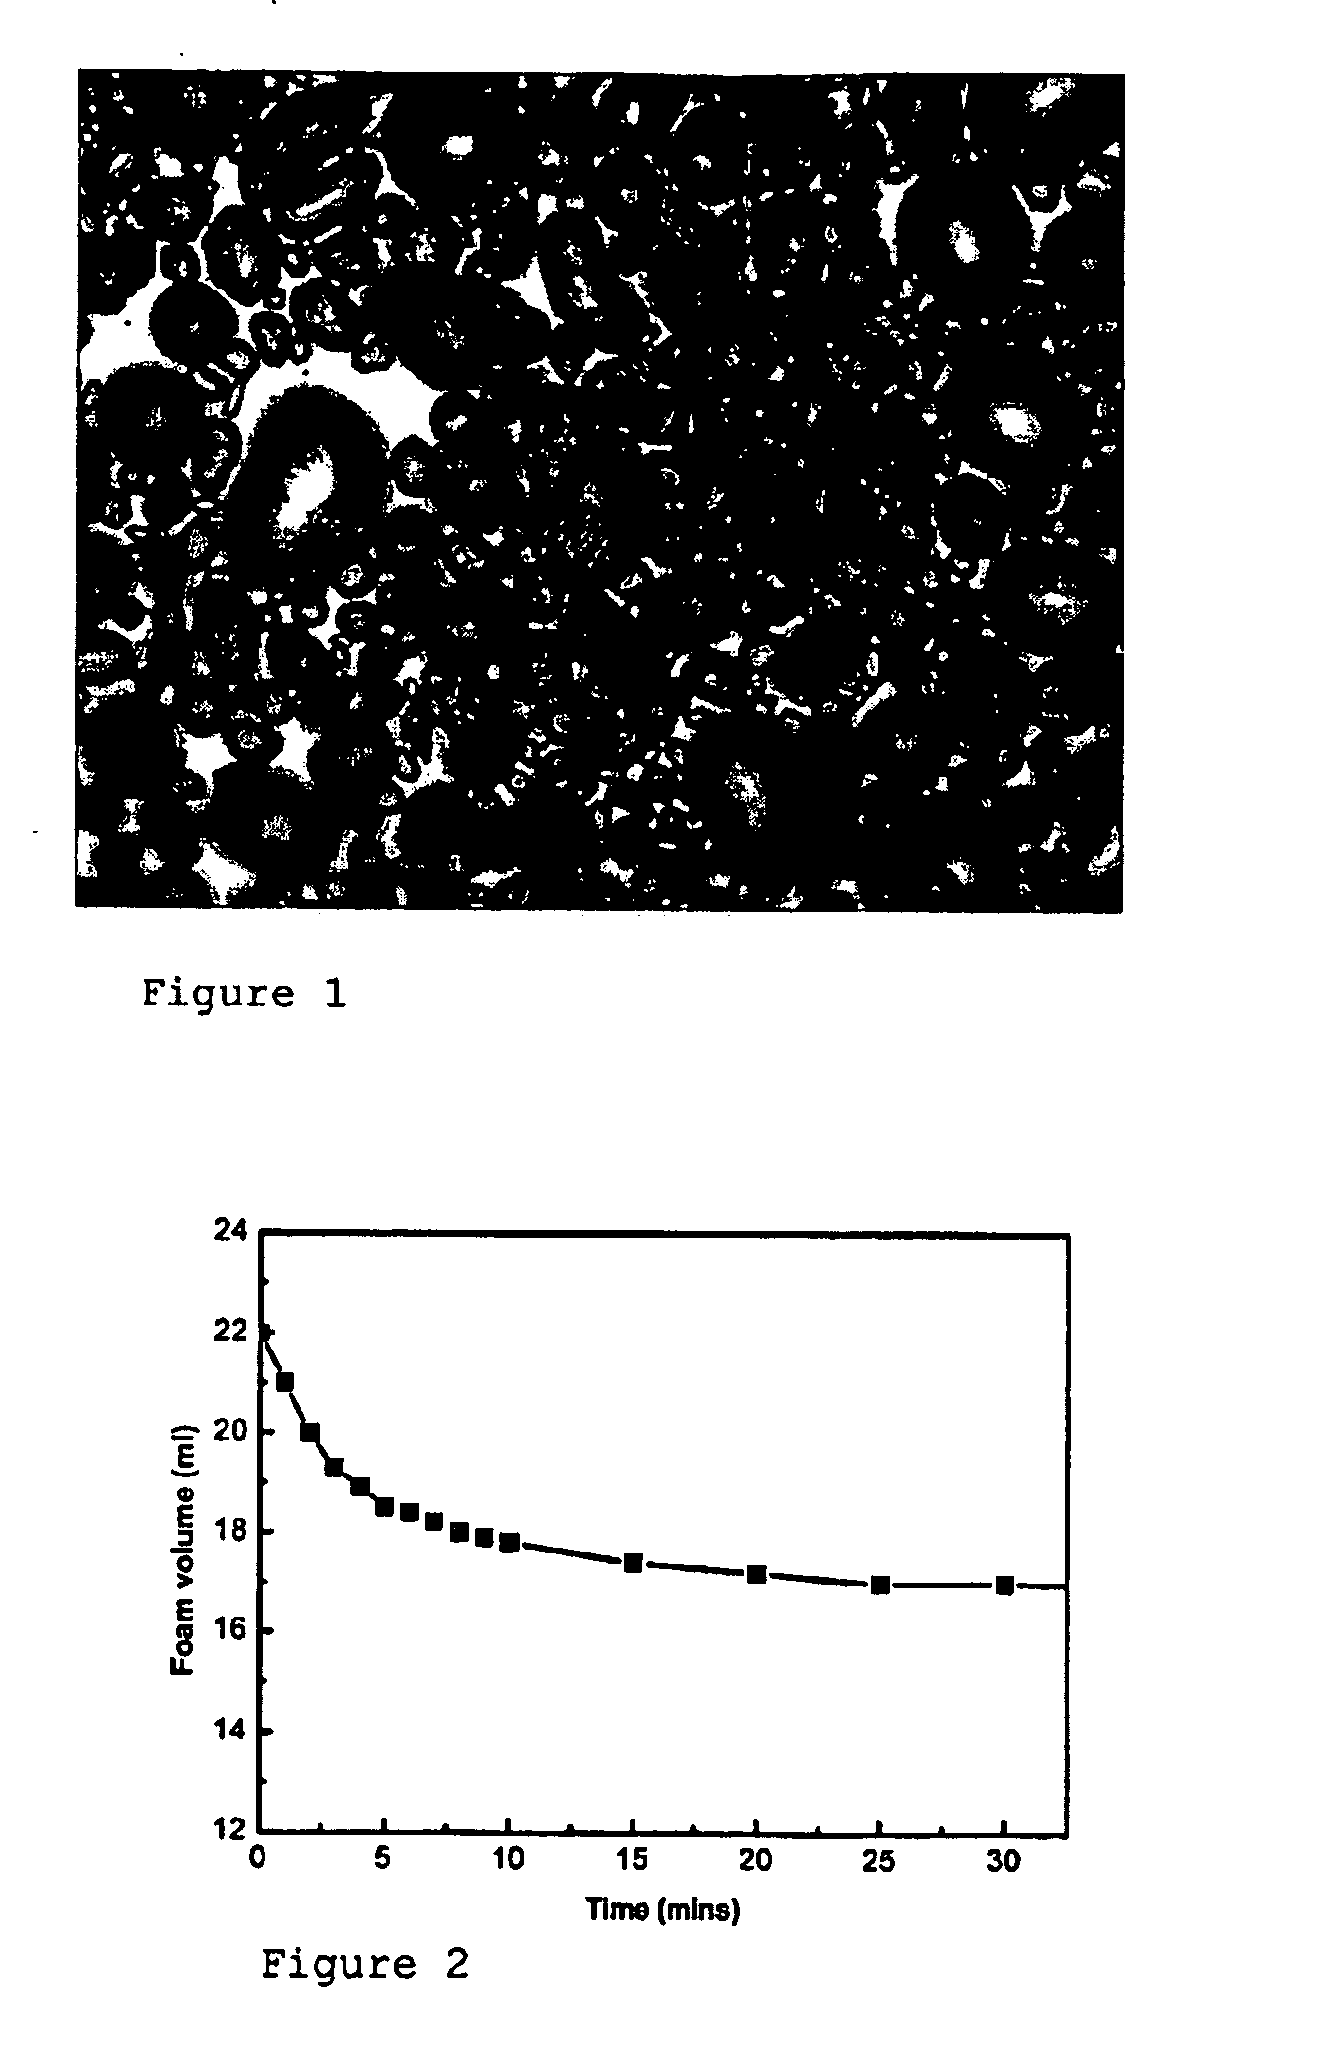 Aerated food product and process for preparing it